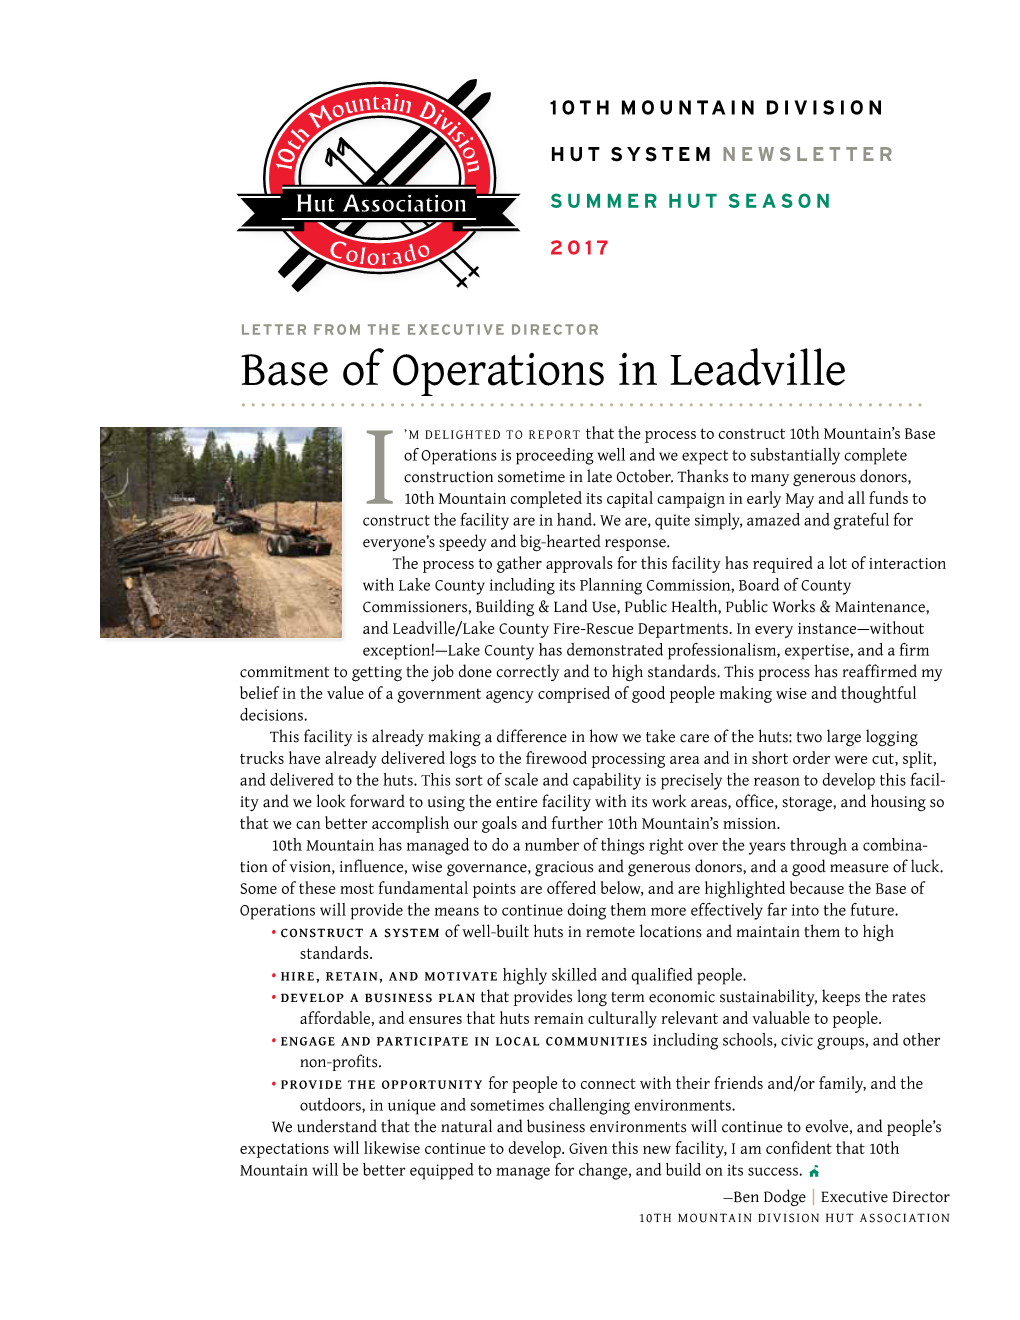 Base of Operations in Leadville